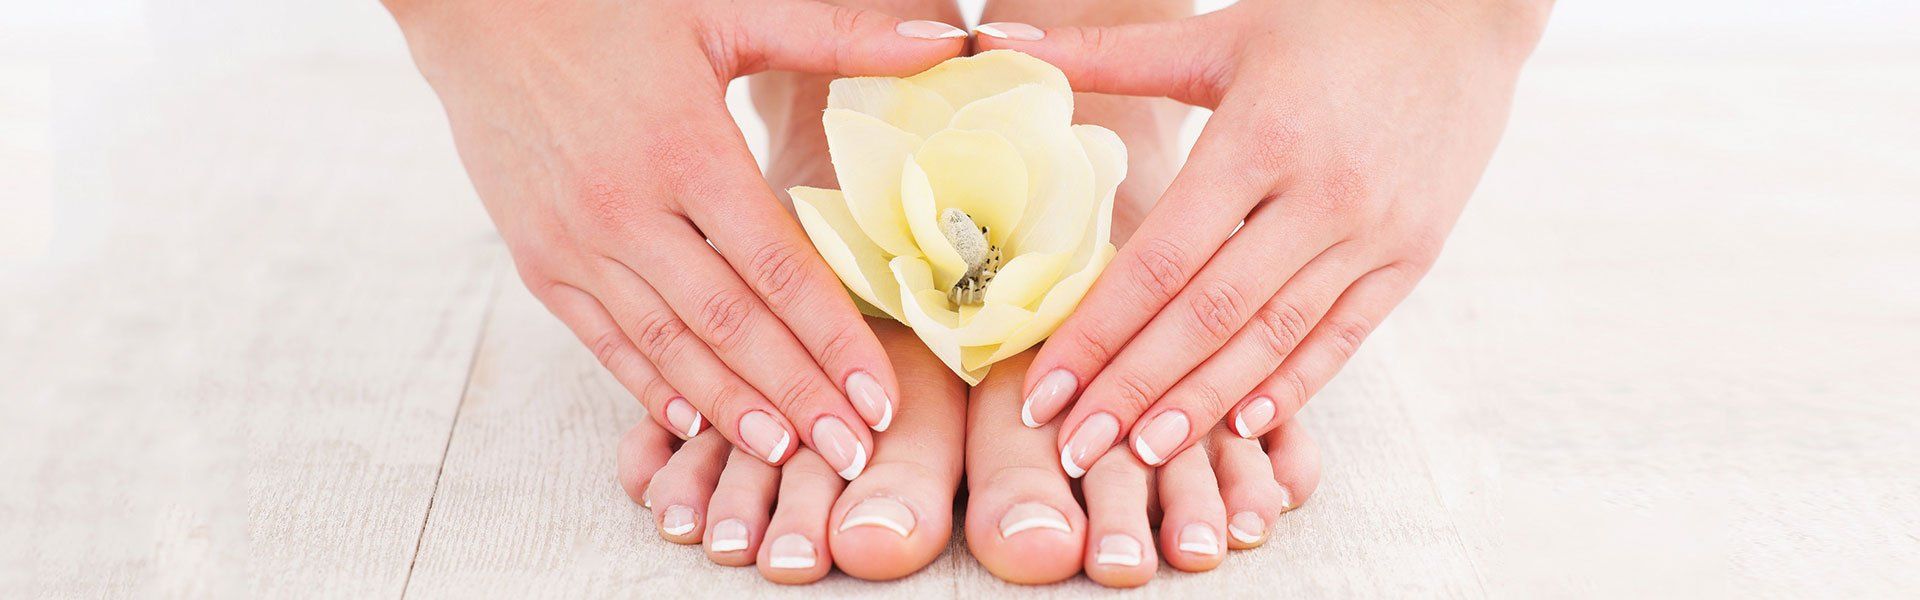 We offer professional pedicures, manicures and nail art.